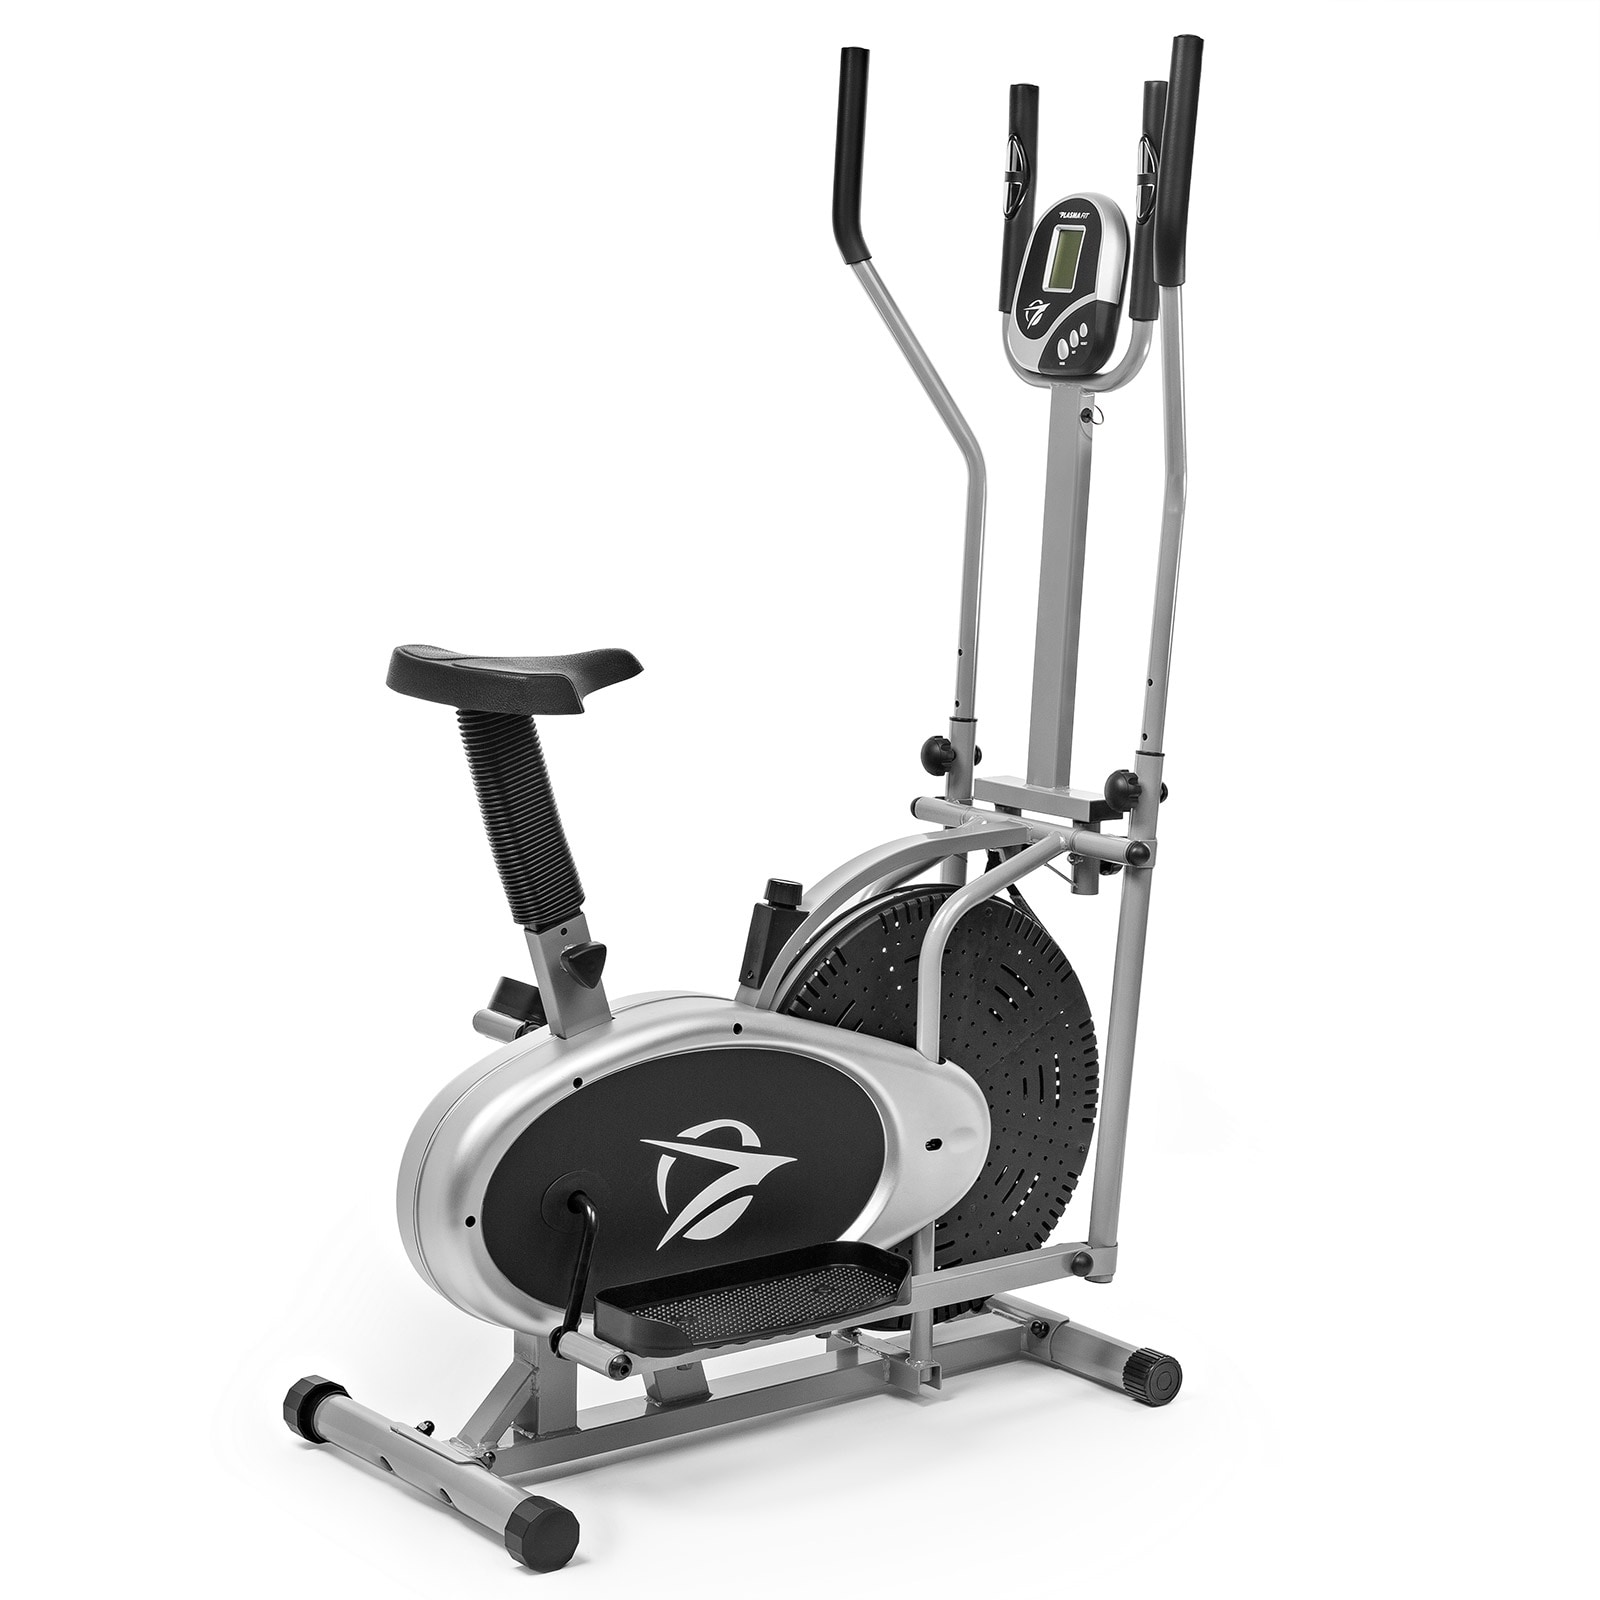 1 Ellittica Cross Trainer & Cyclette NUOVO Confidence Fitness 2-in 